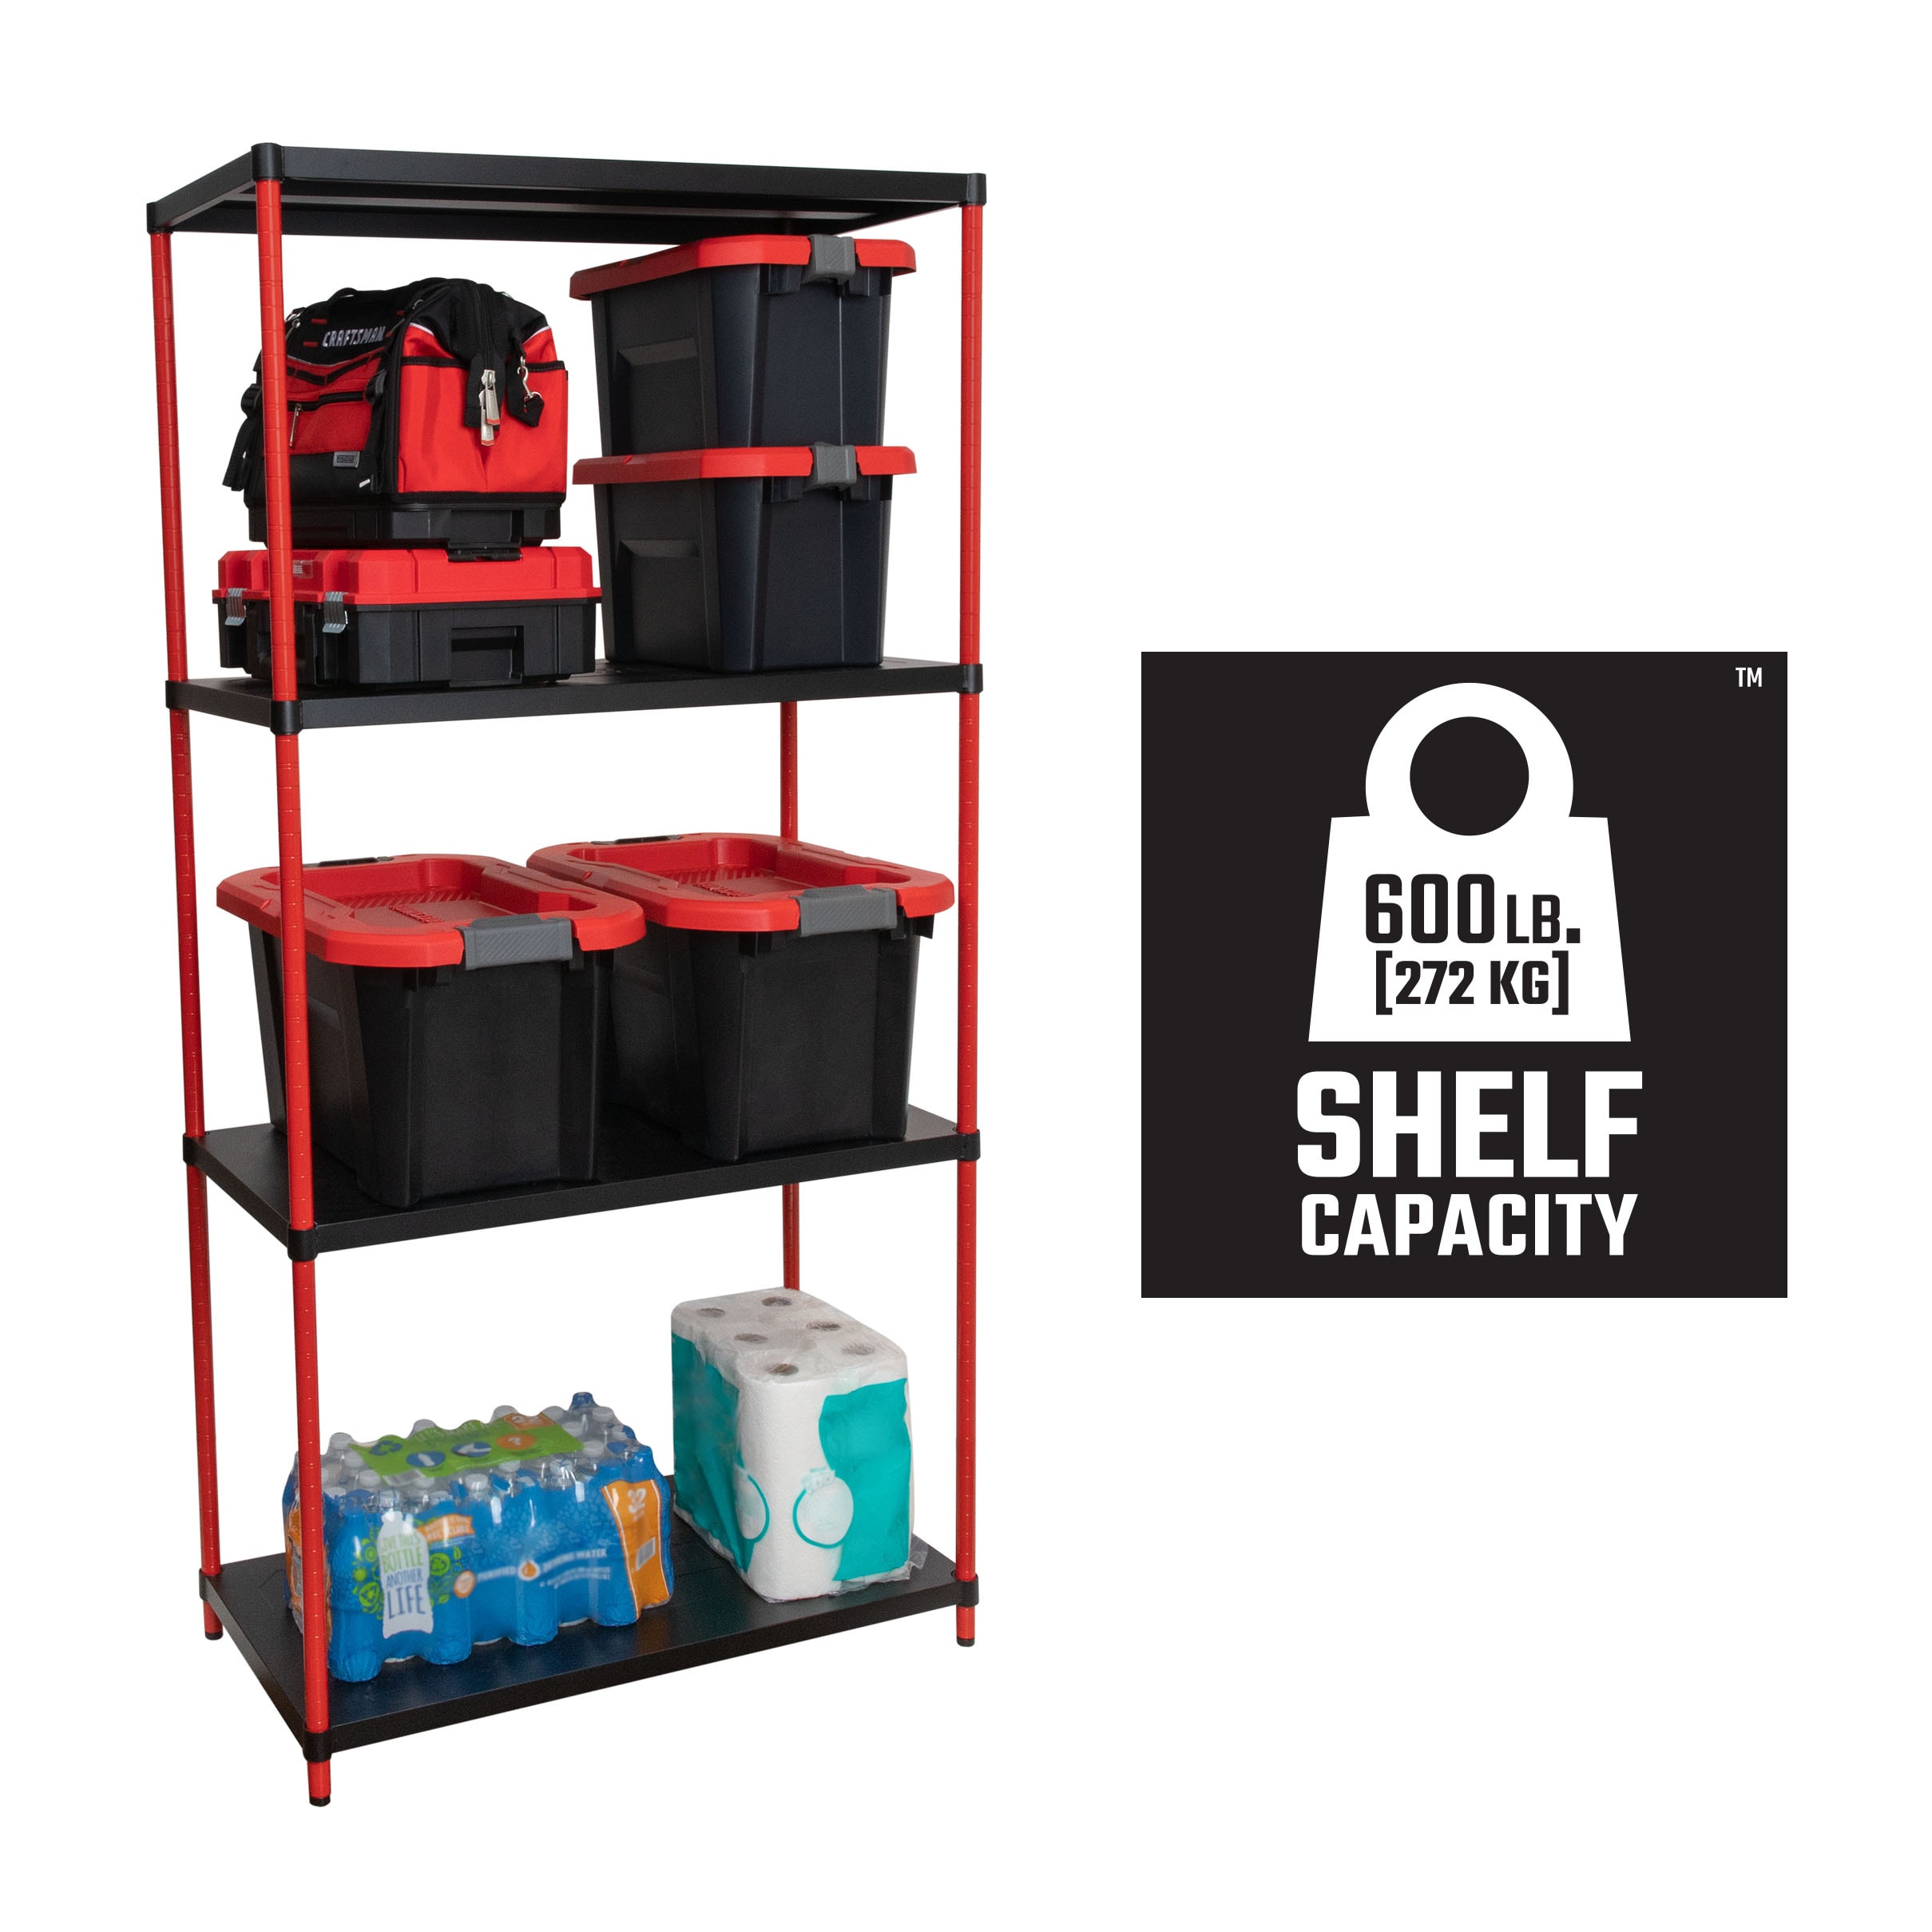 Clear View Storage Cabinet, 12-Gauge Steel, 4 Shelves, 36W x 24D x 72H -  Made in USA Tools